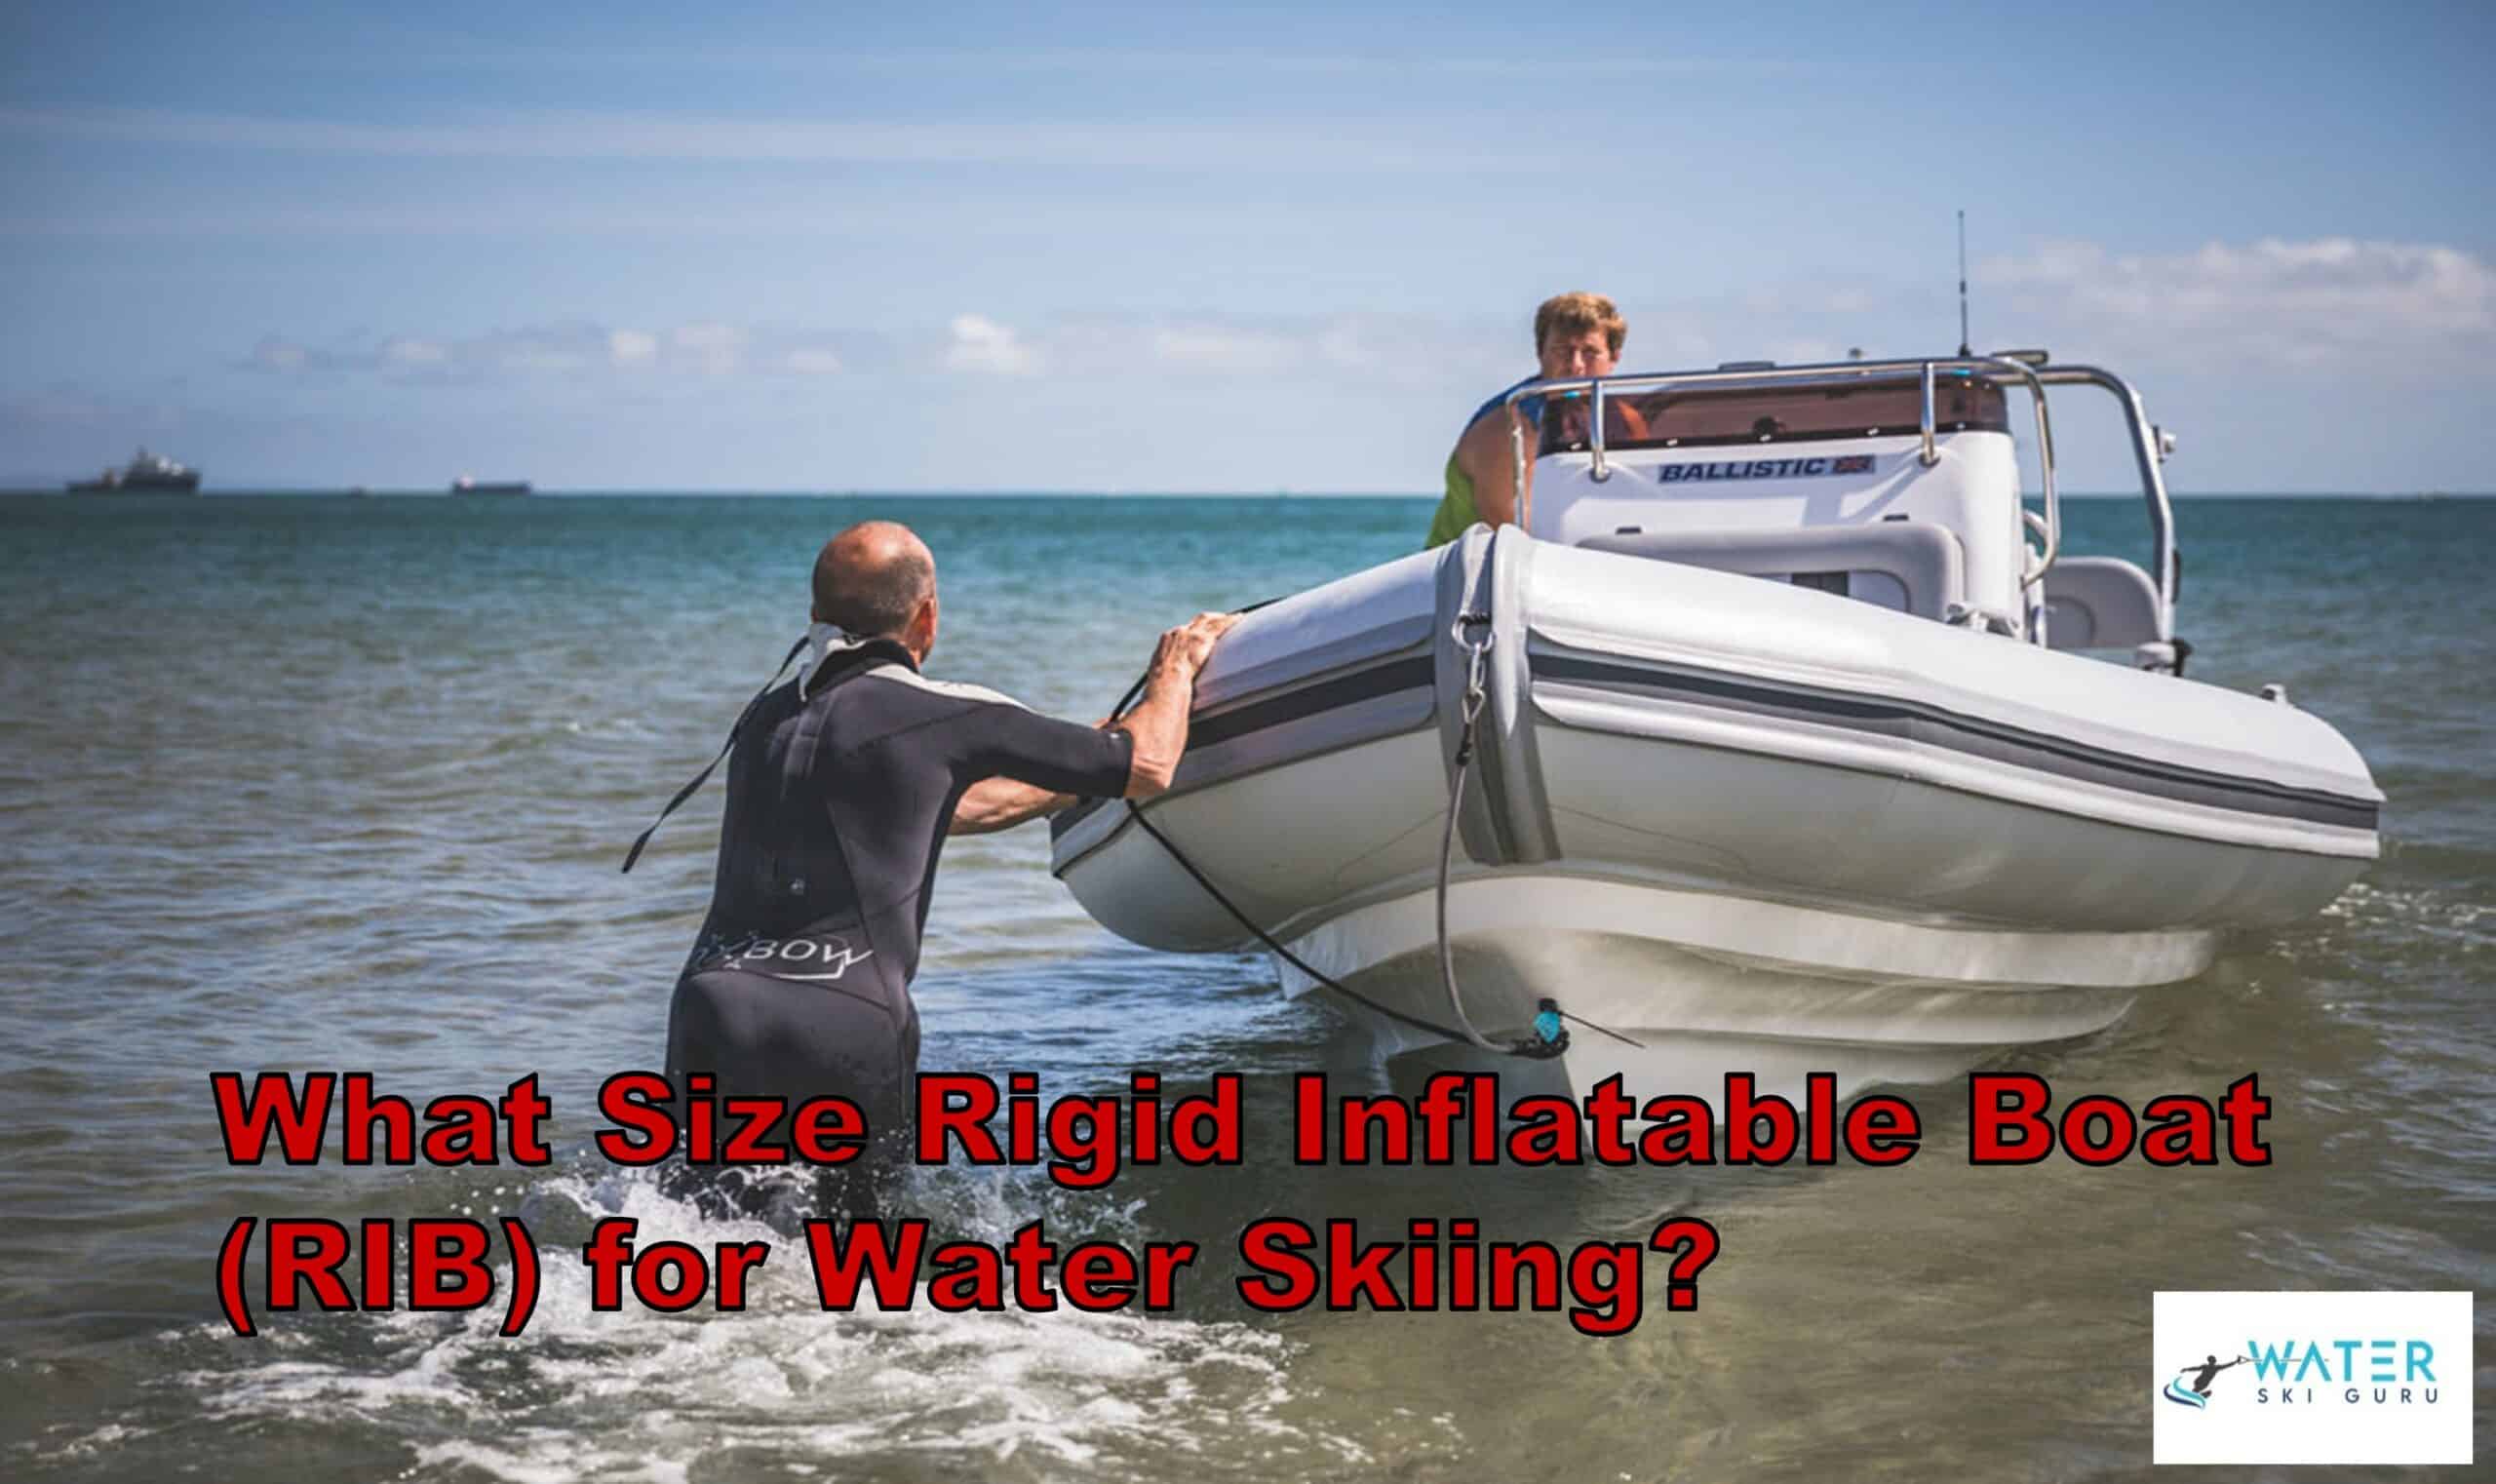 What Size Rigid Inflatable Boat (RIB) for Water Skiing